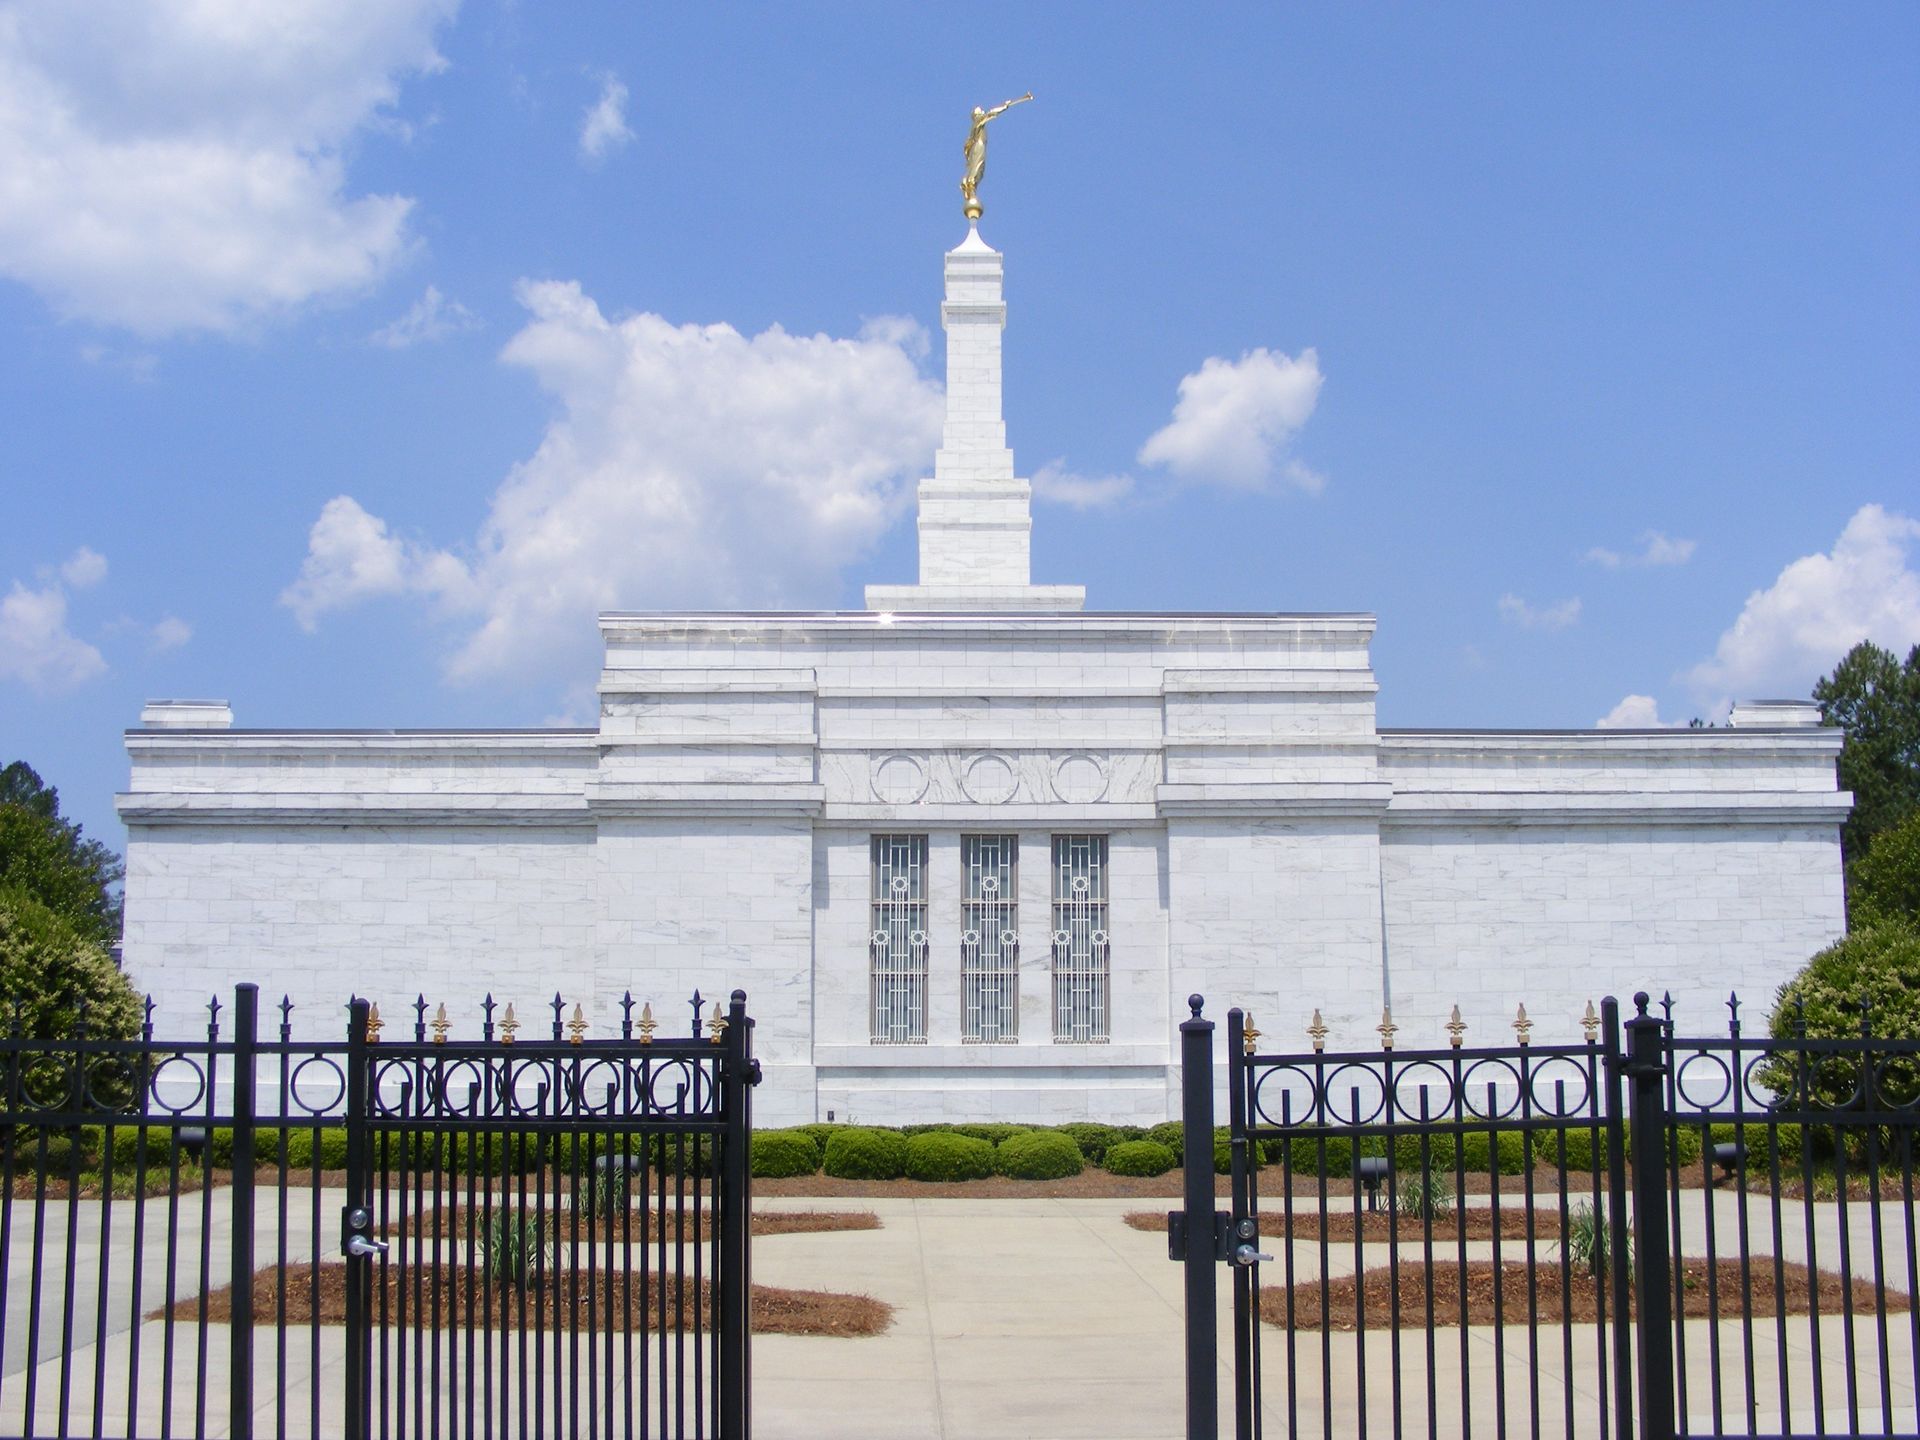 The Raleigh North Carolina Temple side view, including the grounds and exterior of the temple.